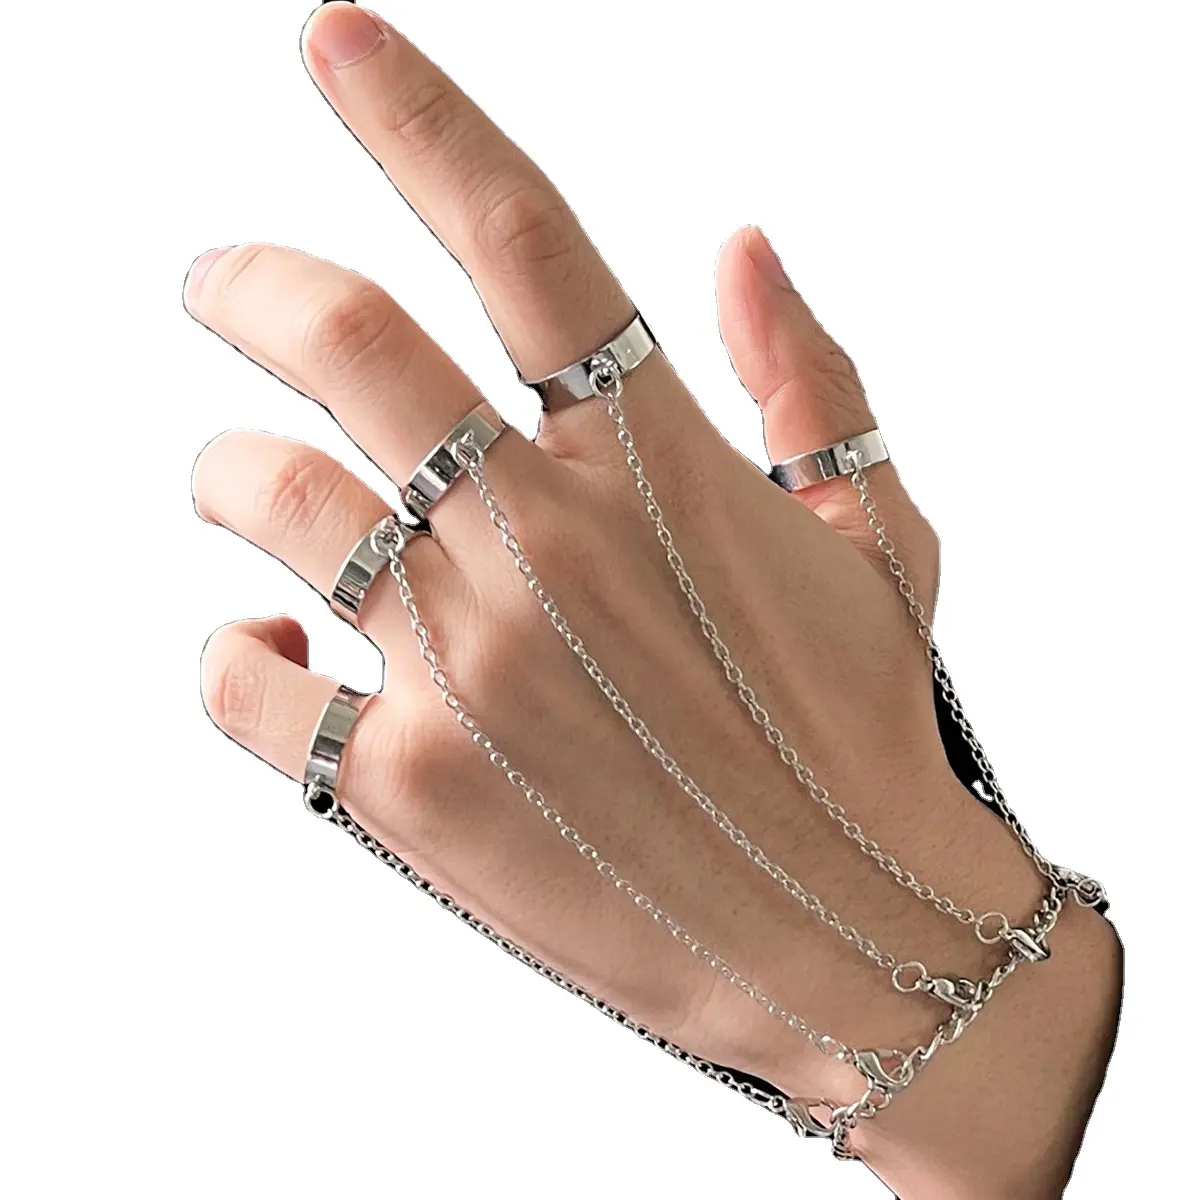 Y760 Punk Geometric Silver Color Chain Wrist Bracelet for Men Ring Charm Set Couple Emo Fashion Jewelry Gifts